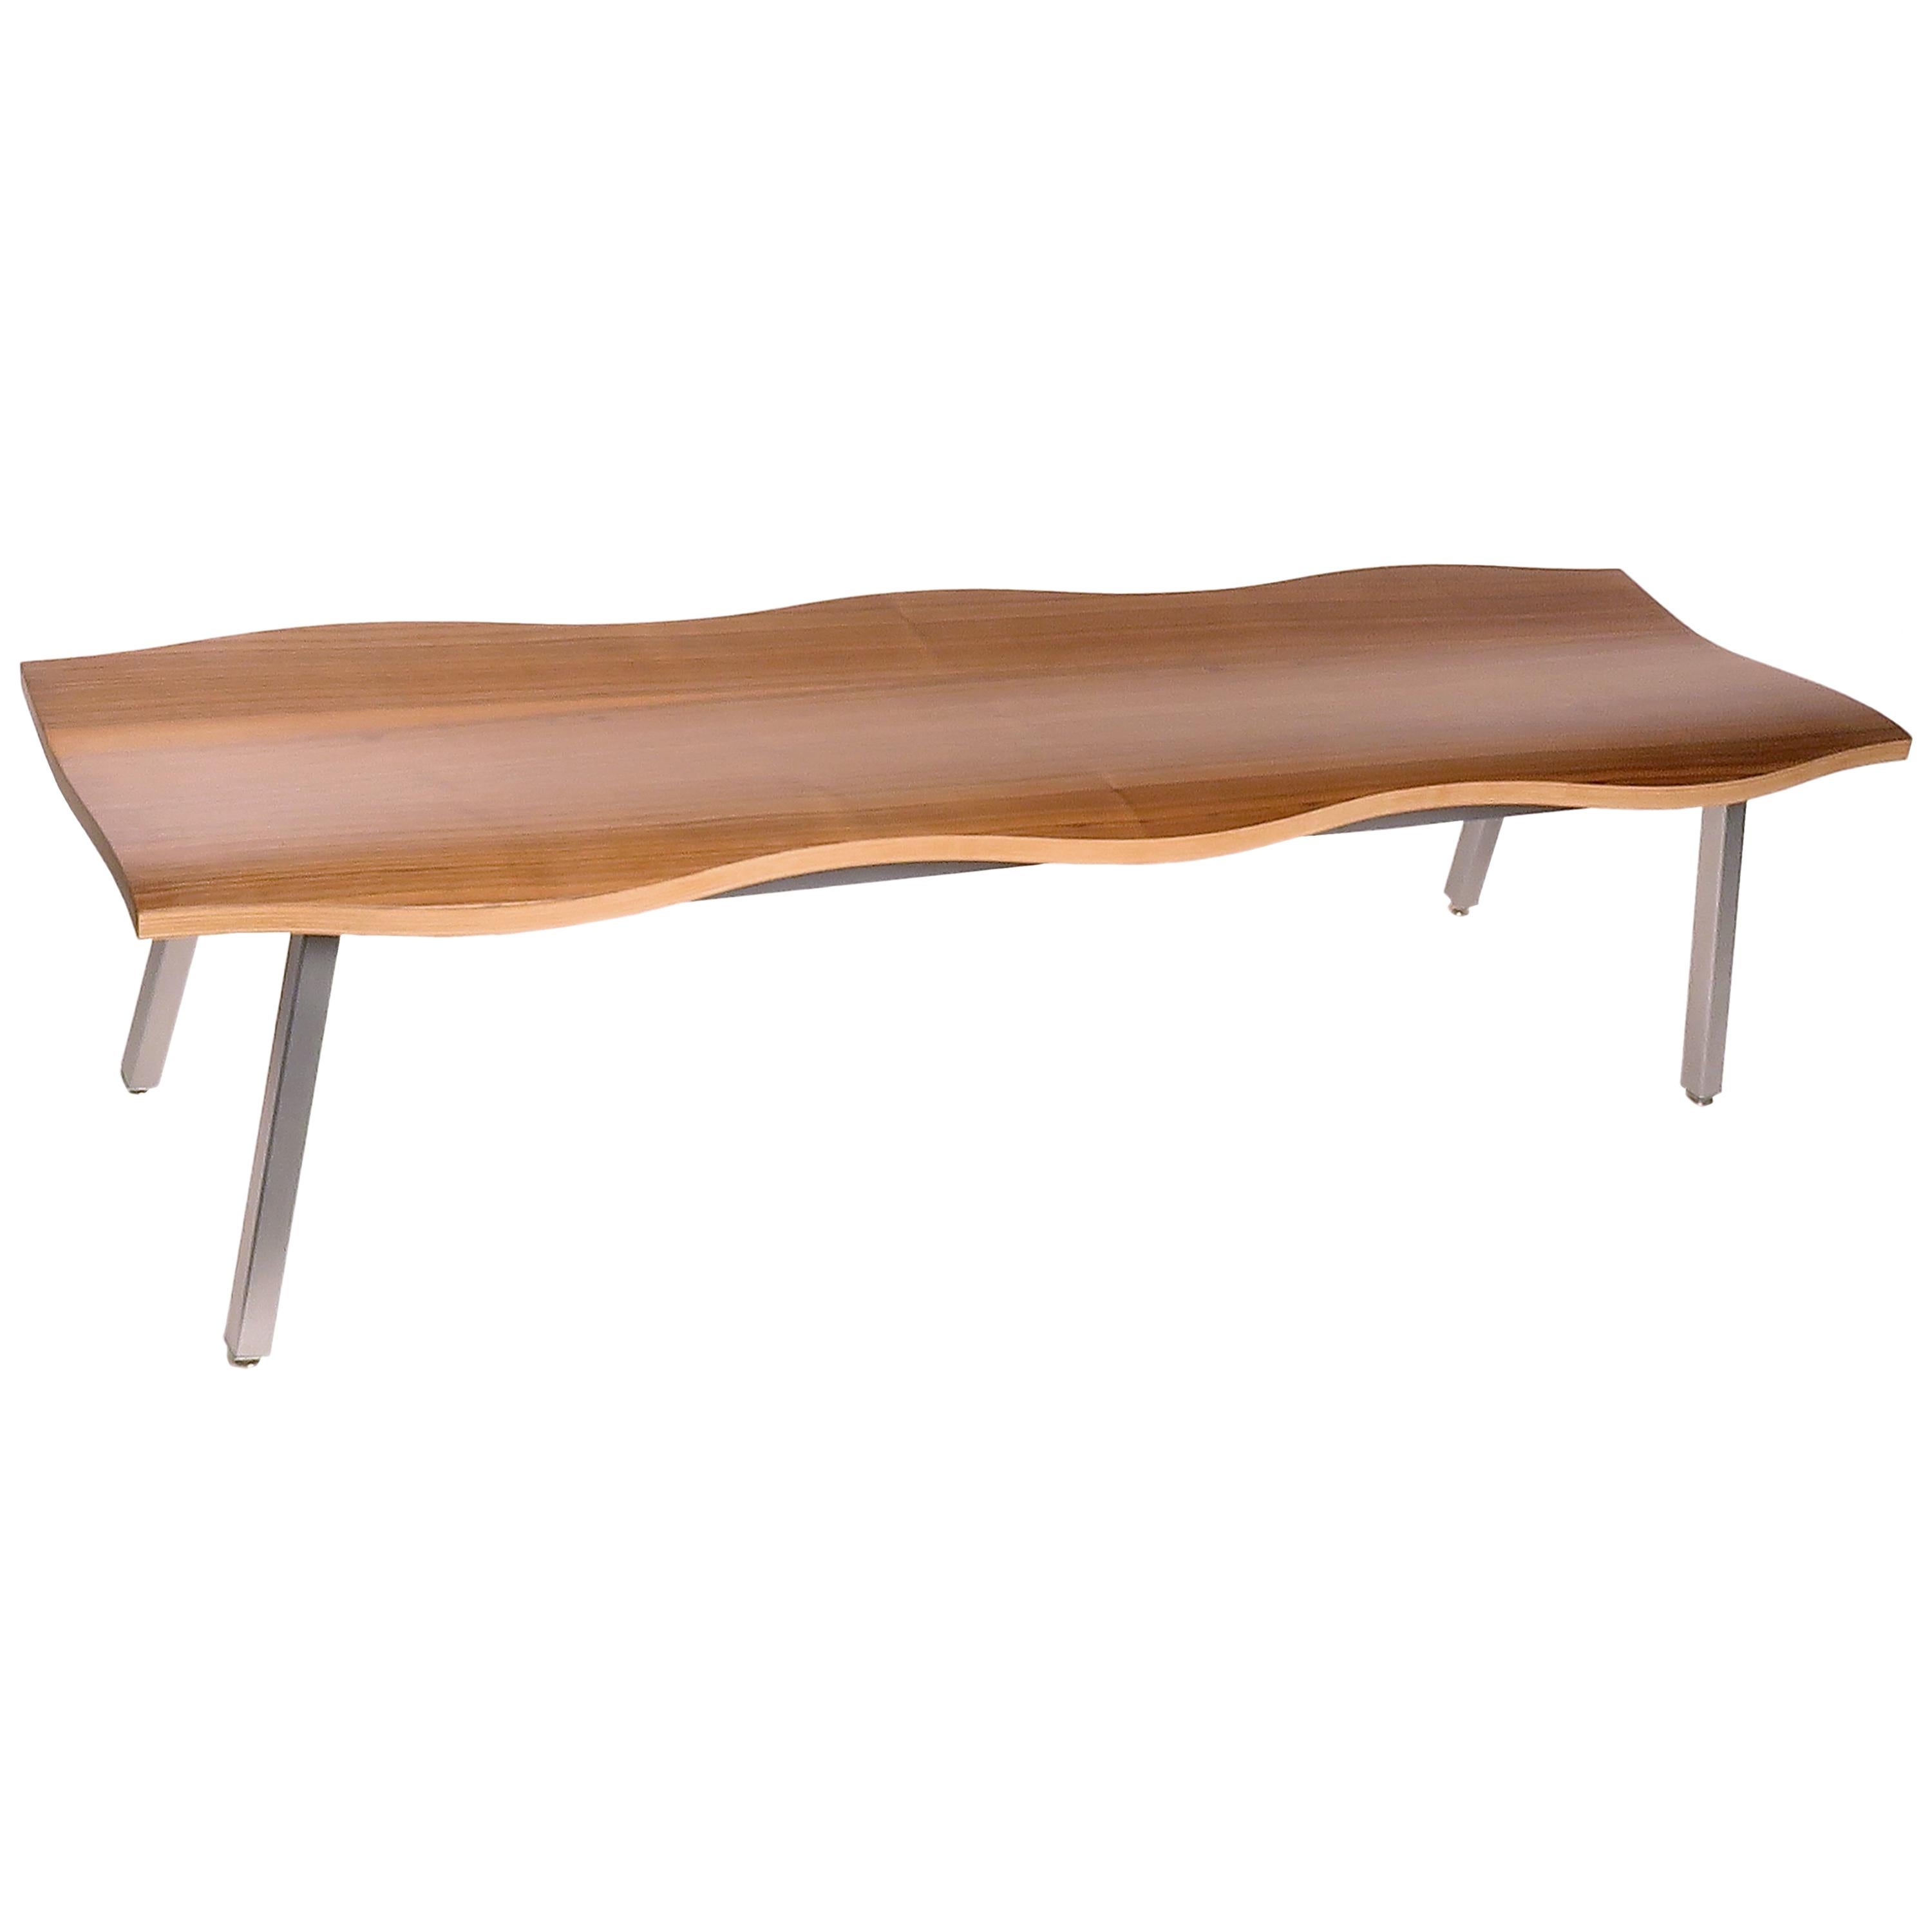 Customizable Maple Three-Seat Bench by Peter Danko For Sale